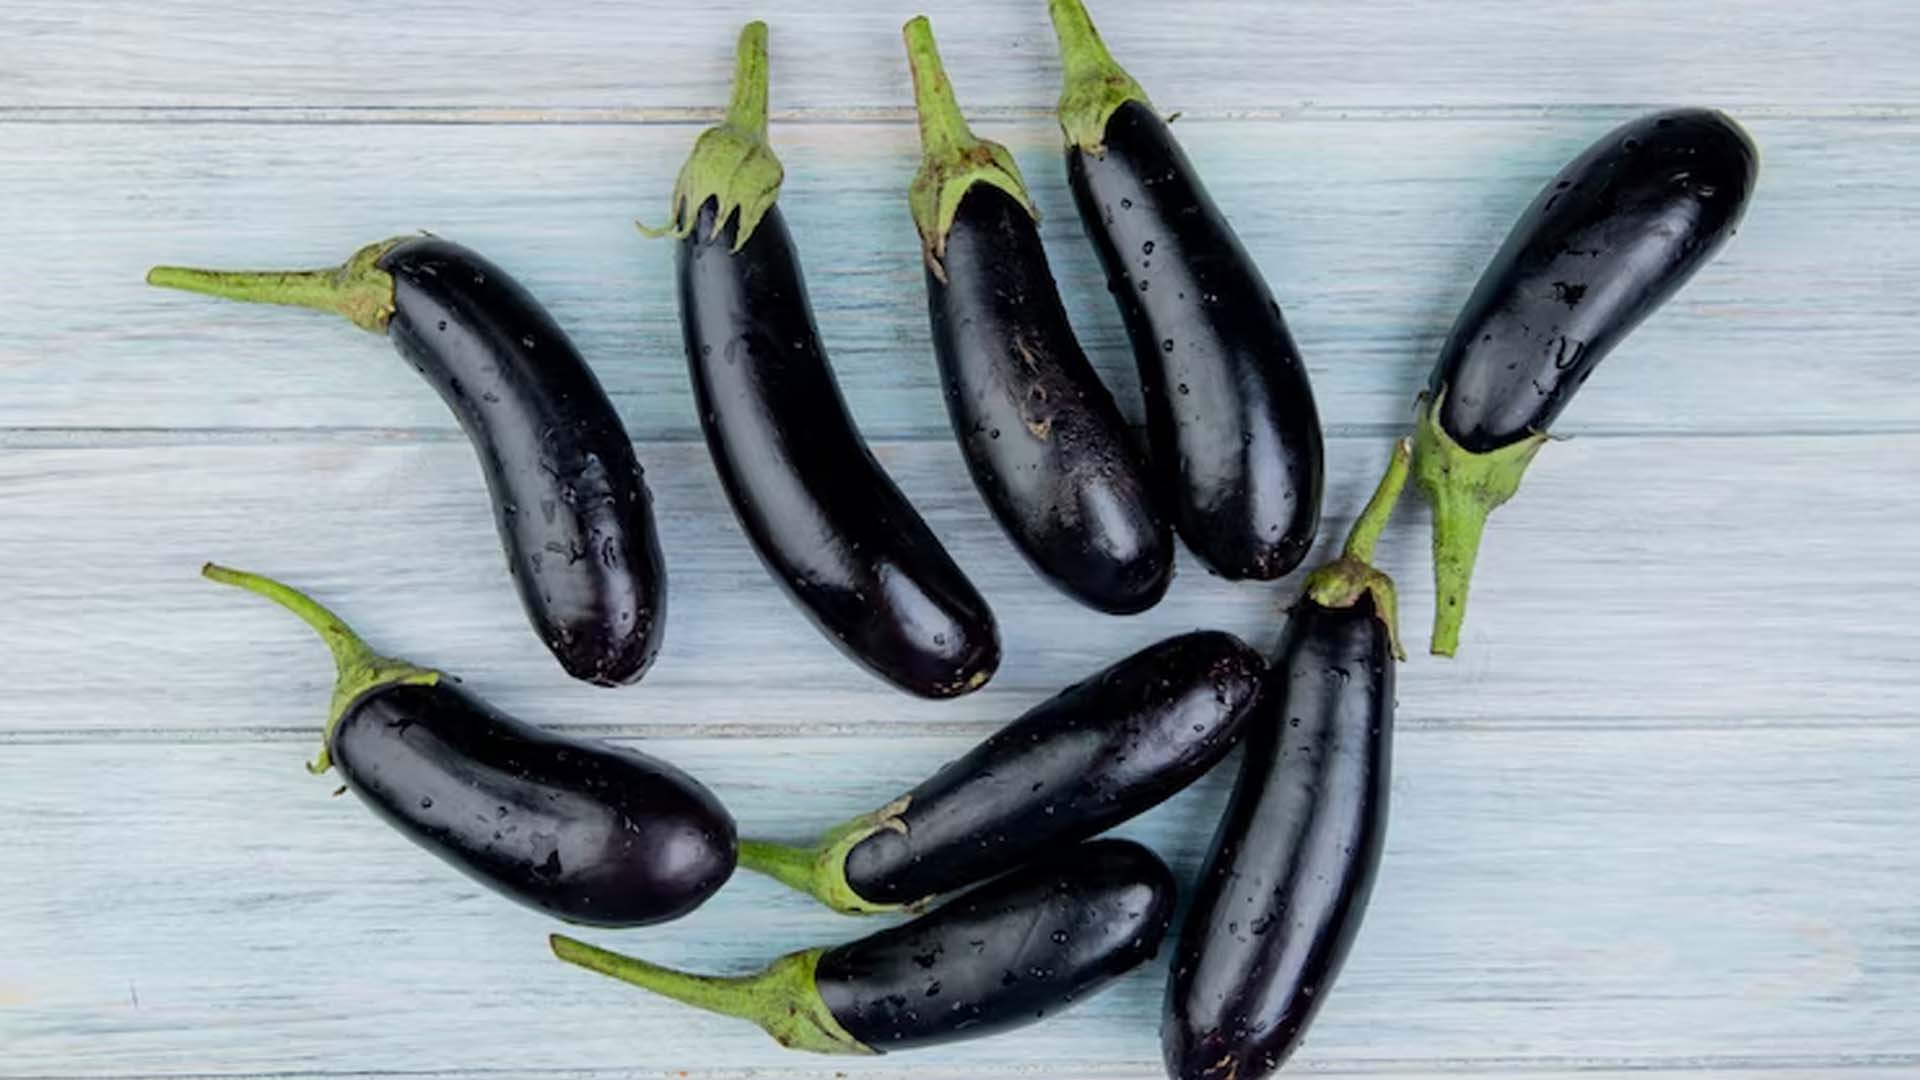 What is the Nutritional Value of Brinjal Per 100g?